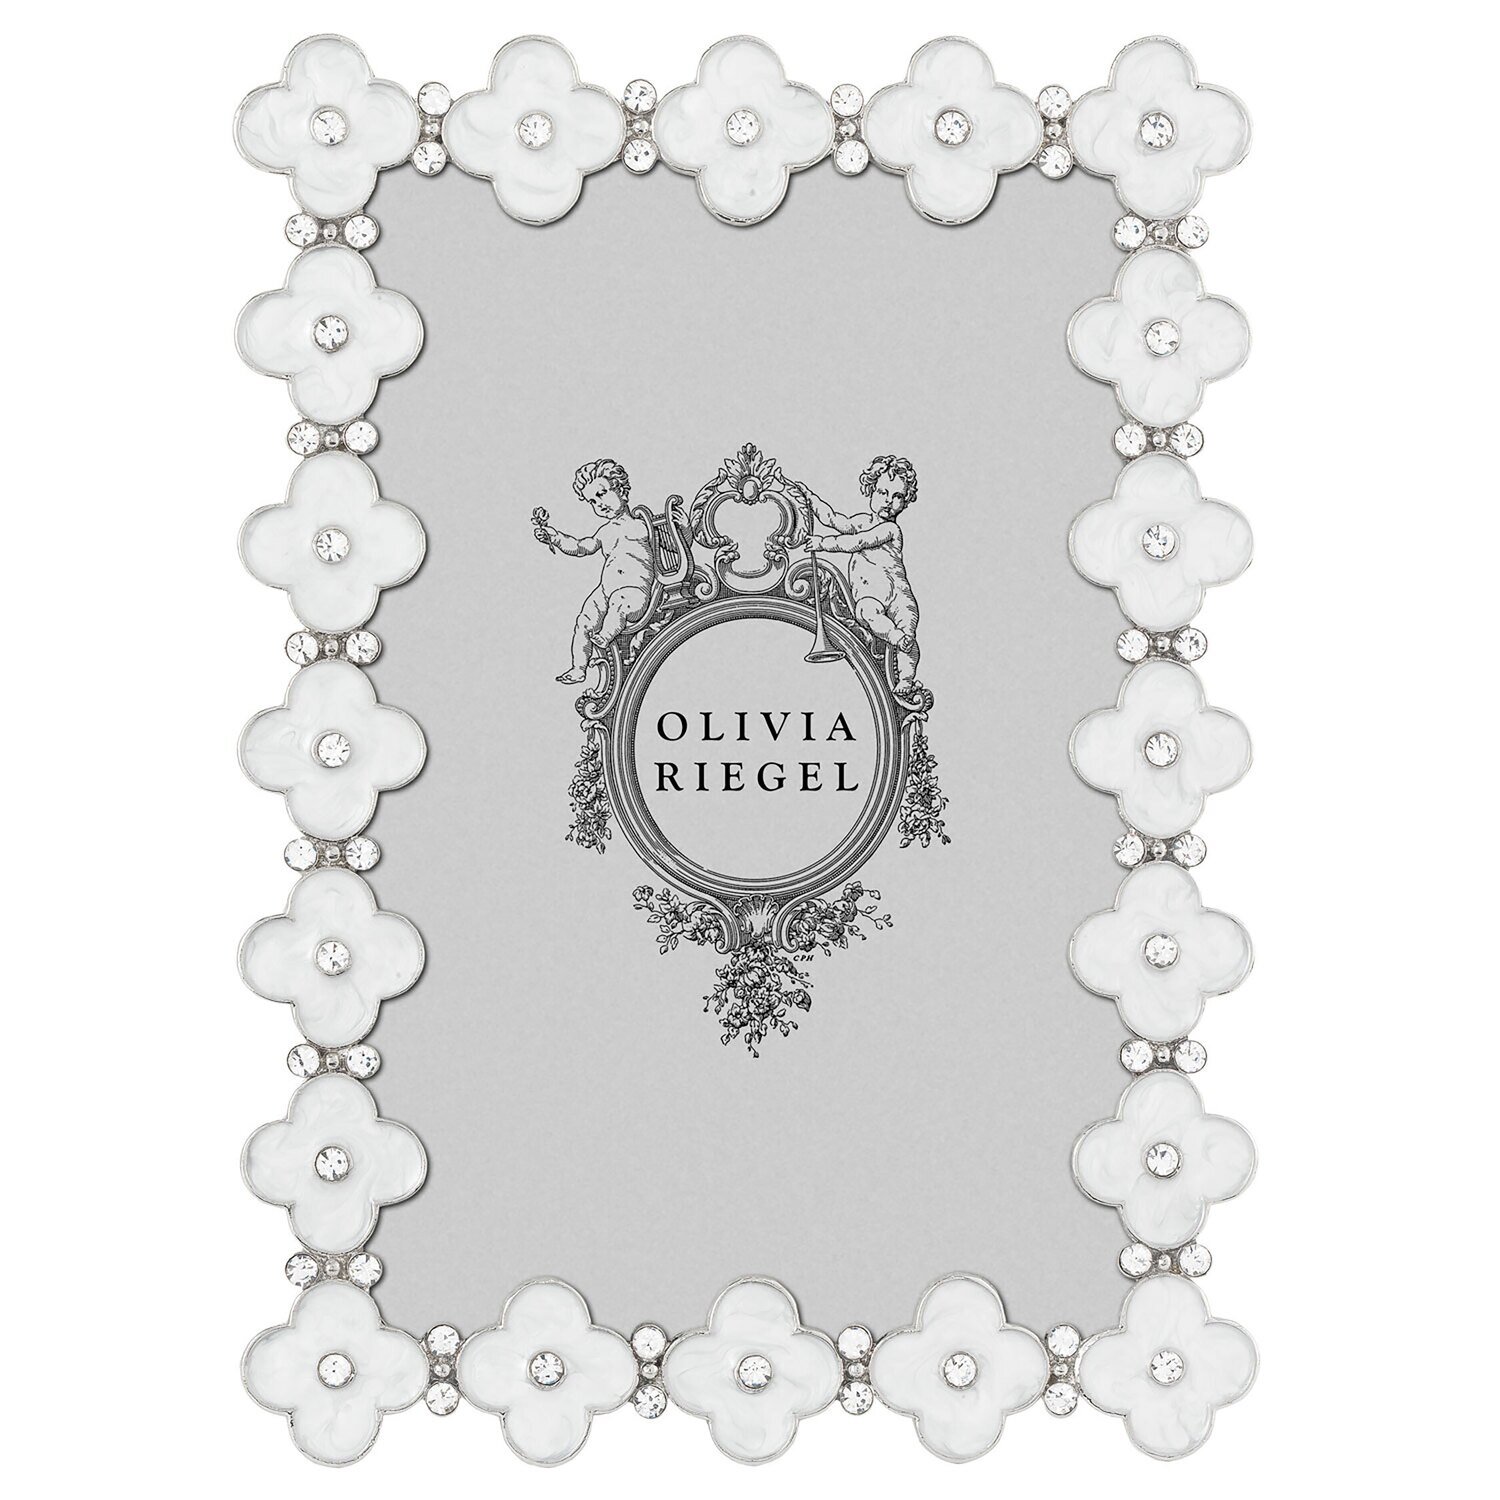 Olivia Riegel White Enamel Clover 4 x 6 Inch Picture Frame RT4874